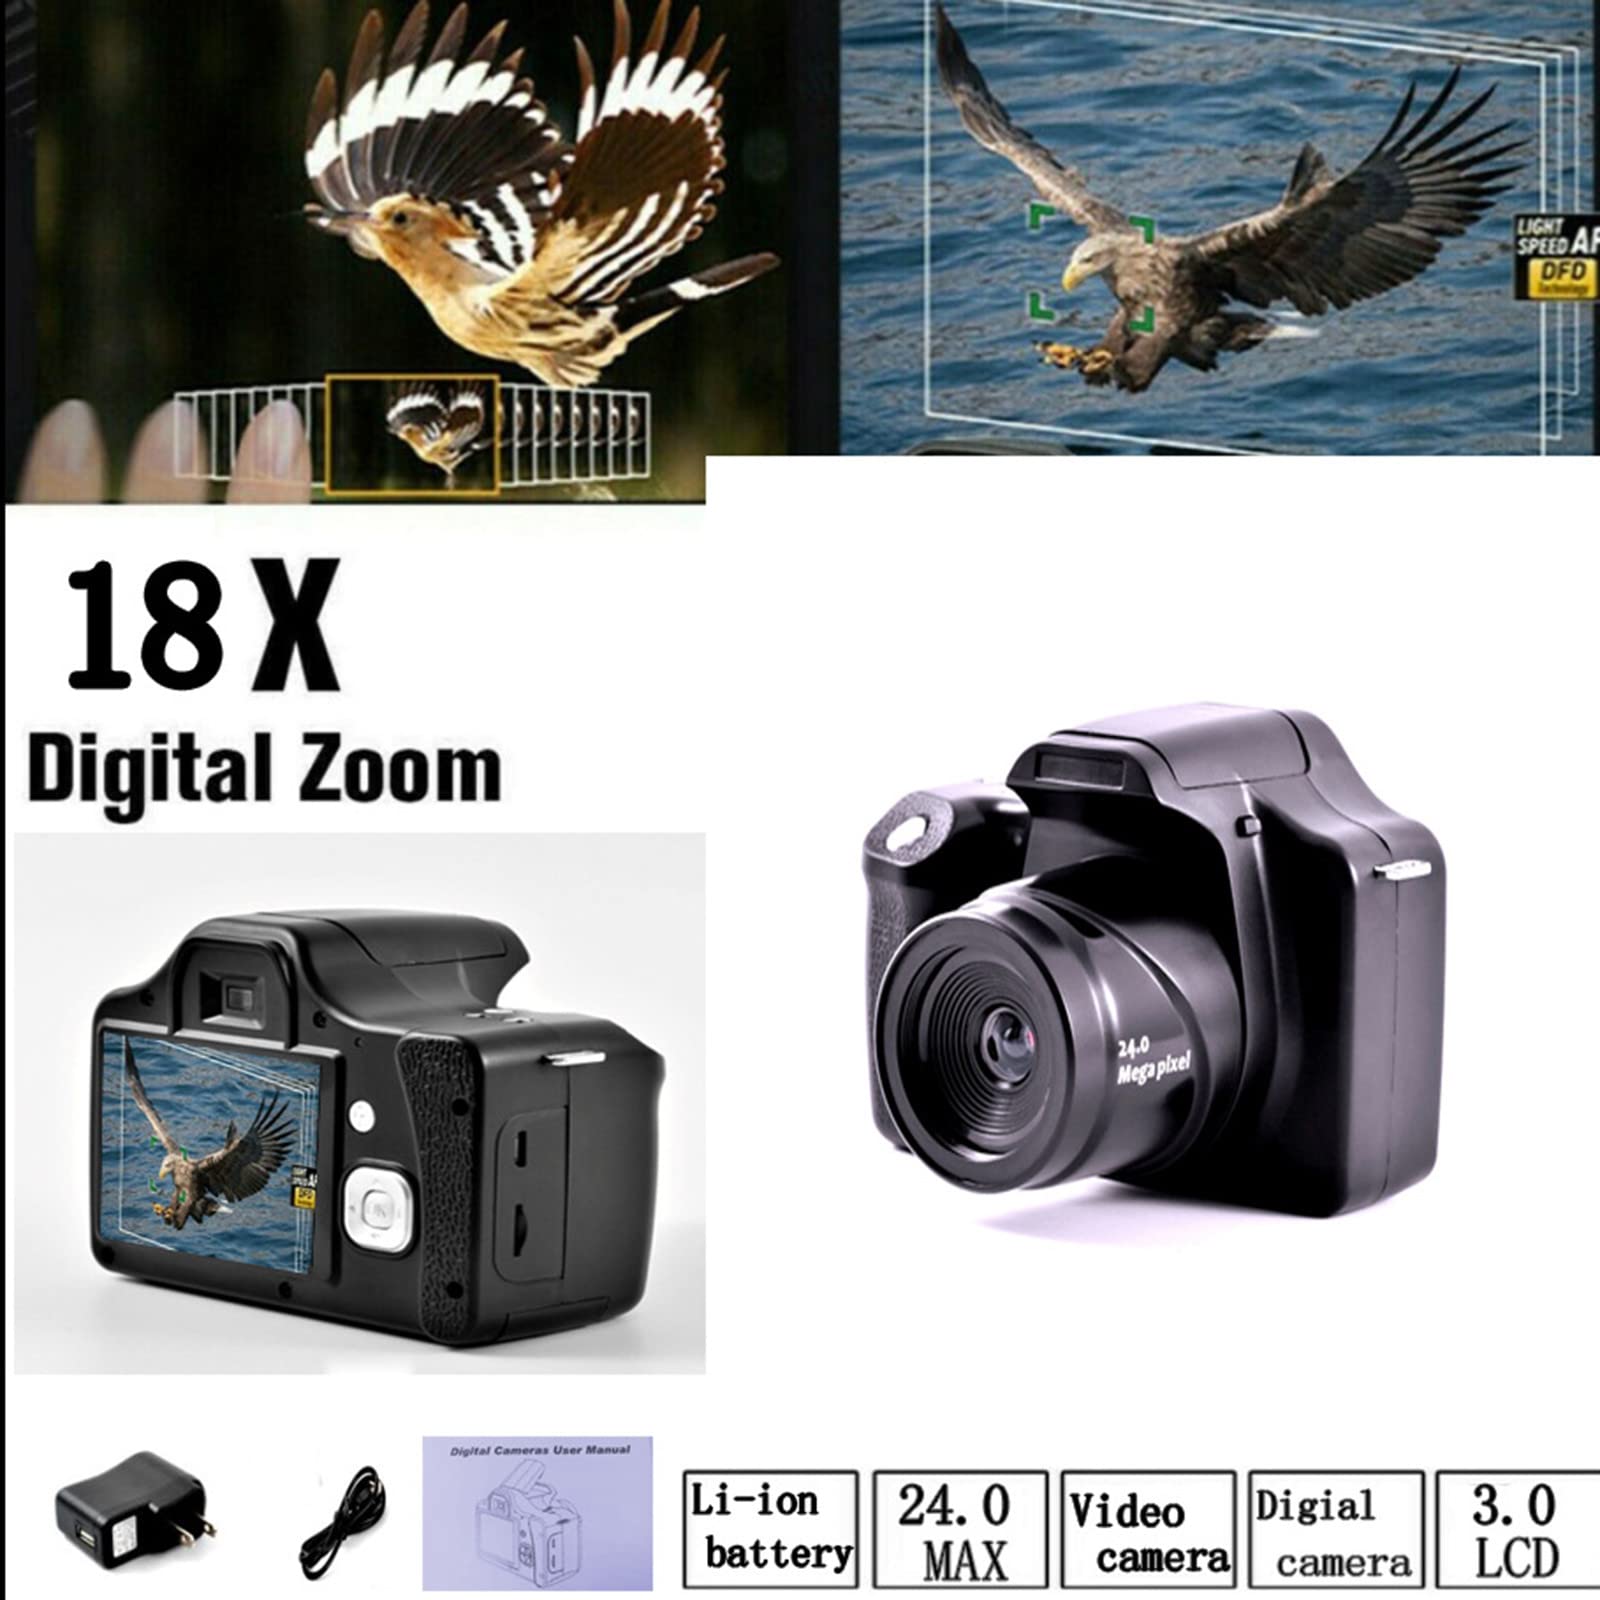 Digital Camera for Photography, 16MP 2.4 Inch LCD Screen 16X Digital Zoom Point and S-Hoot Cameras Digital Camera Small Camera for Teens Students Boys Girls Seniors (Black)